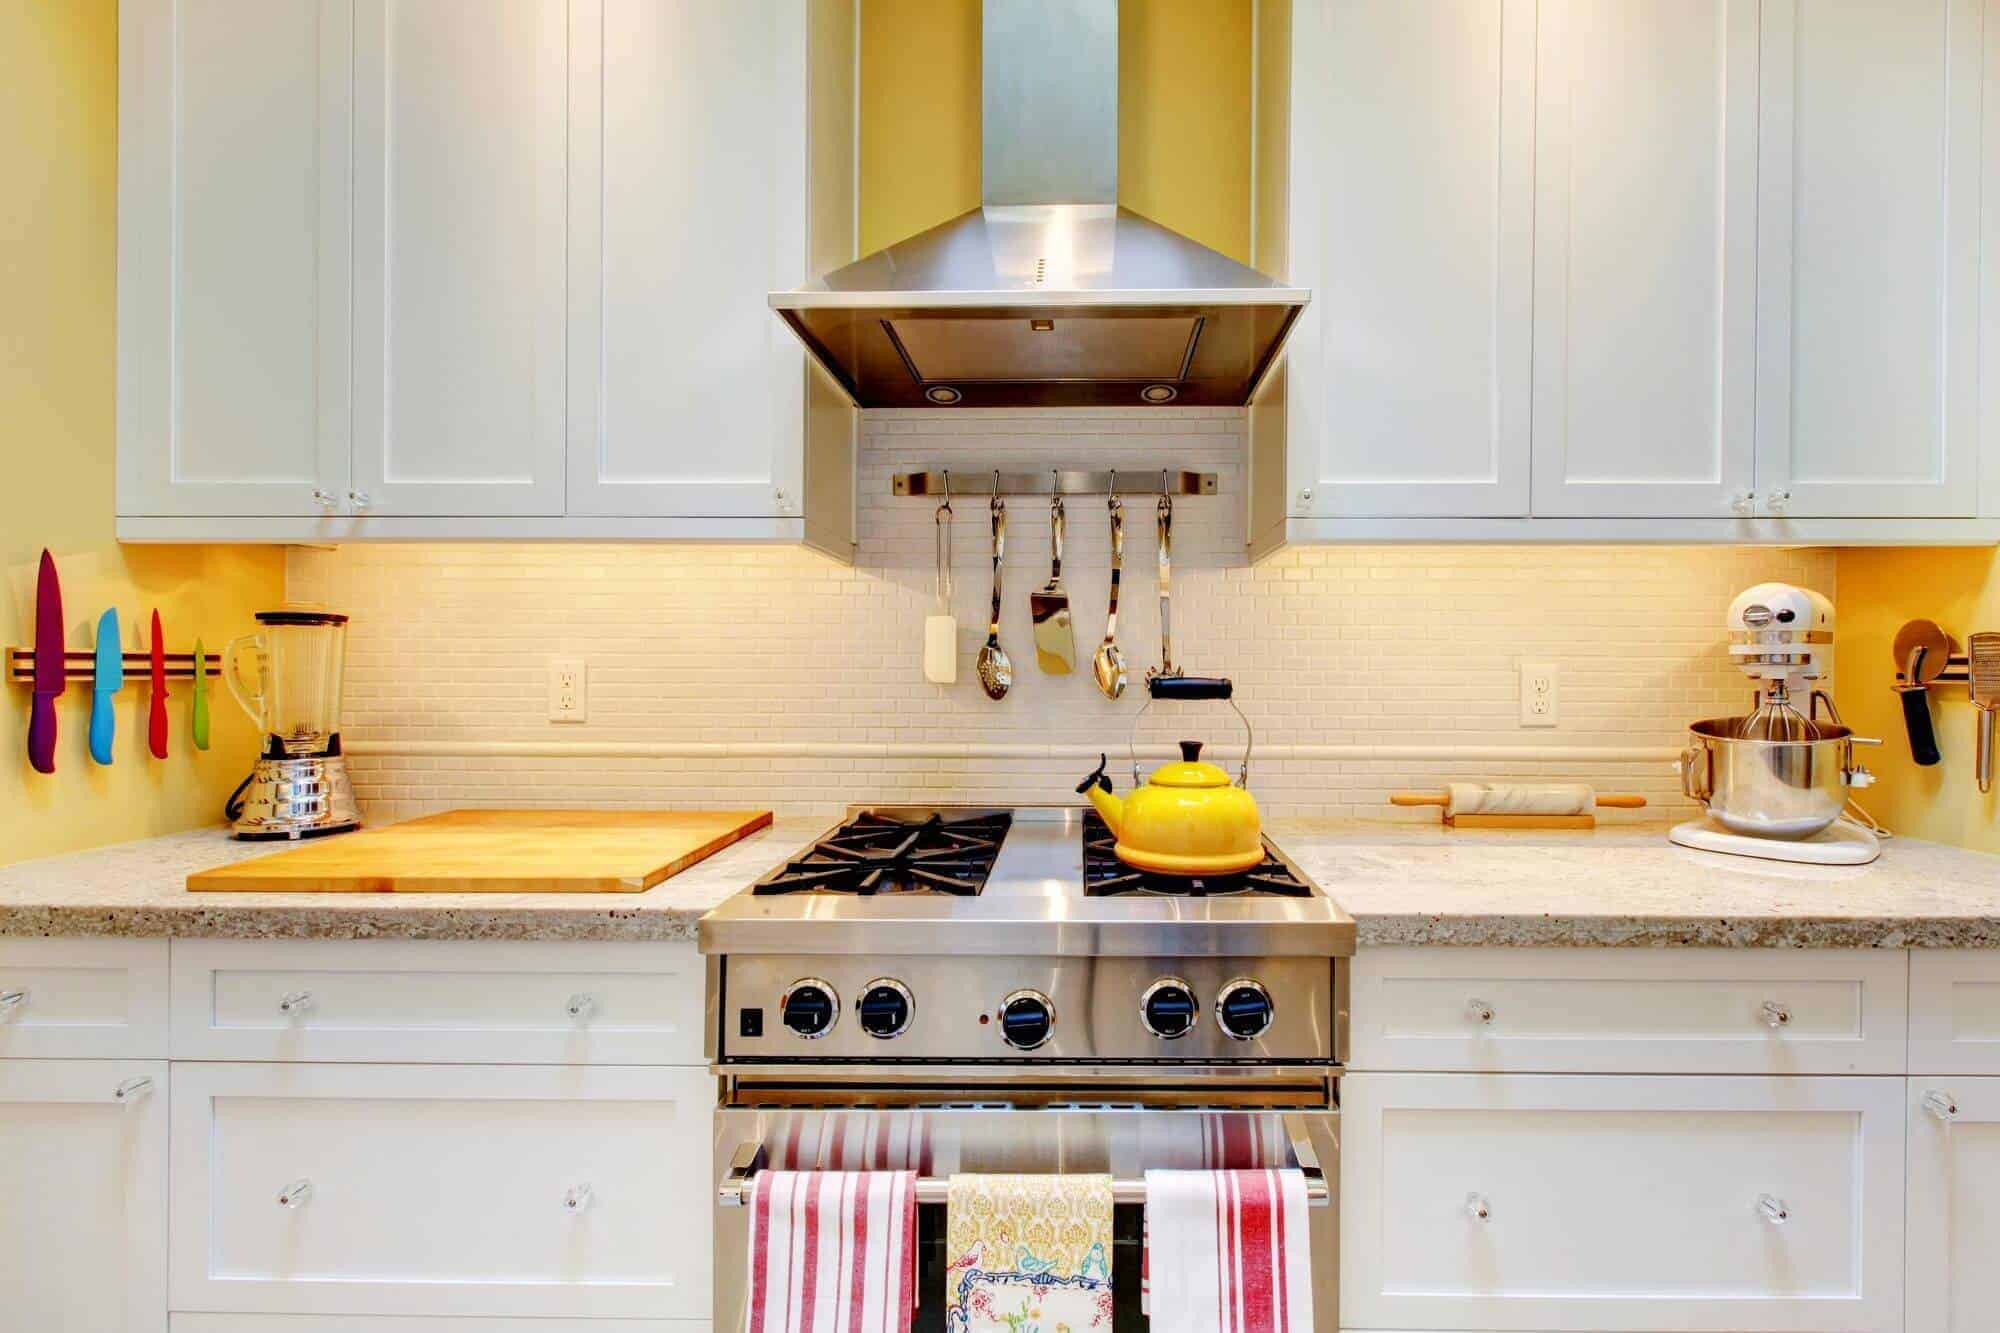 Sparking yellow and white kitchen stoves oven and countertop